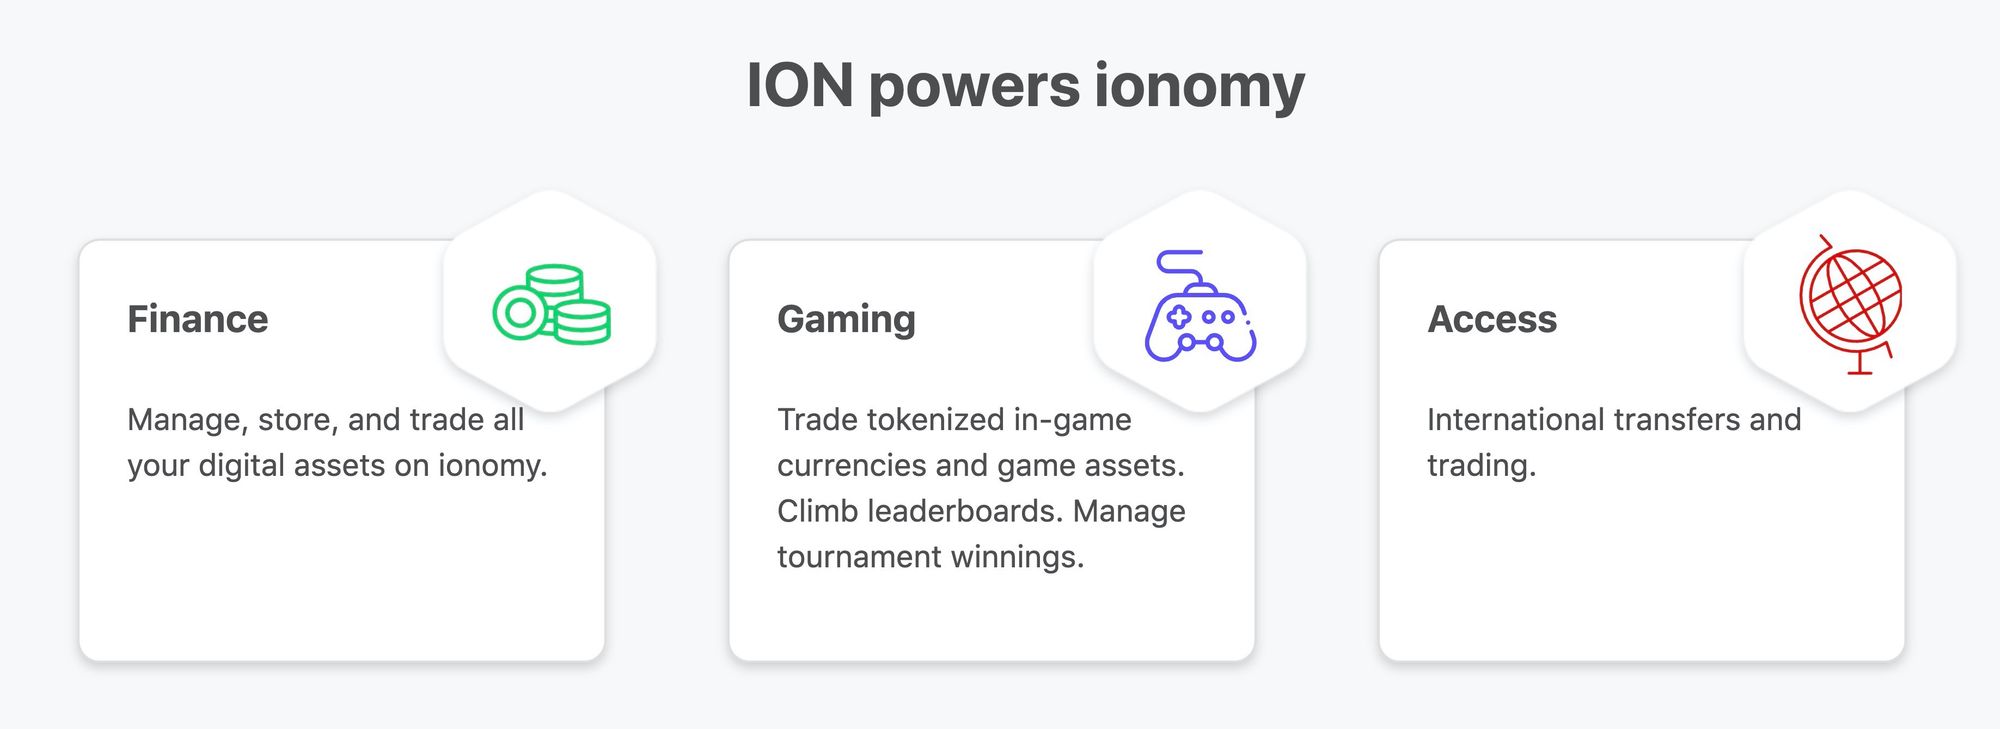 ionomy 4.0 preview